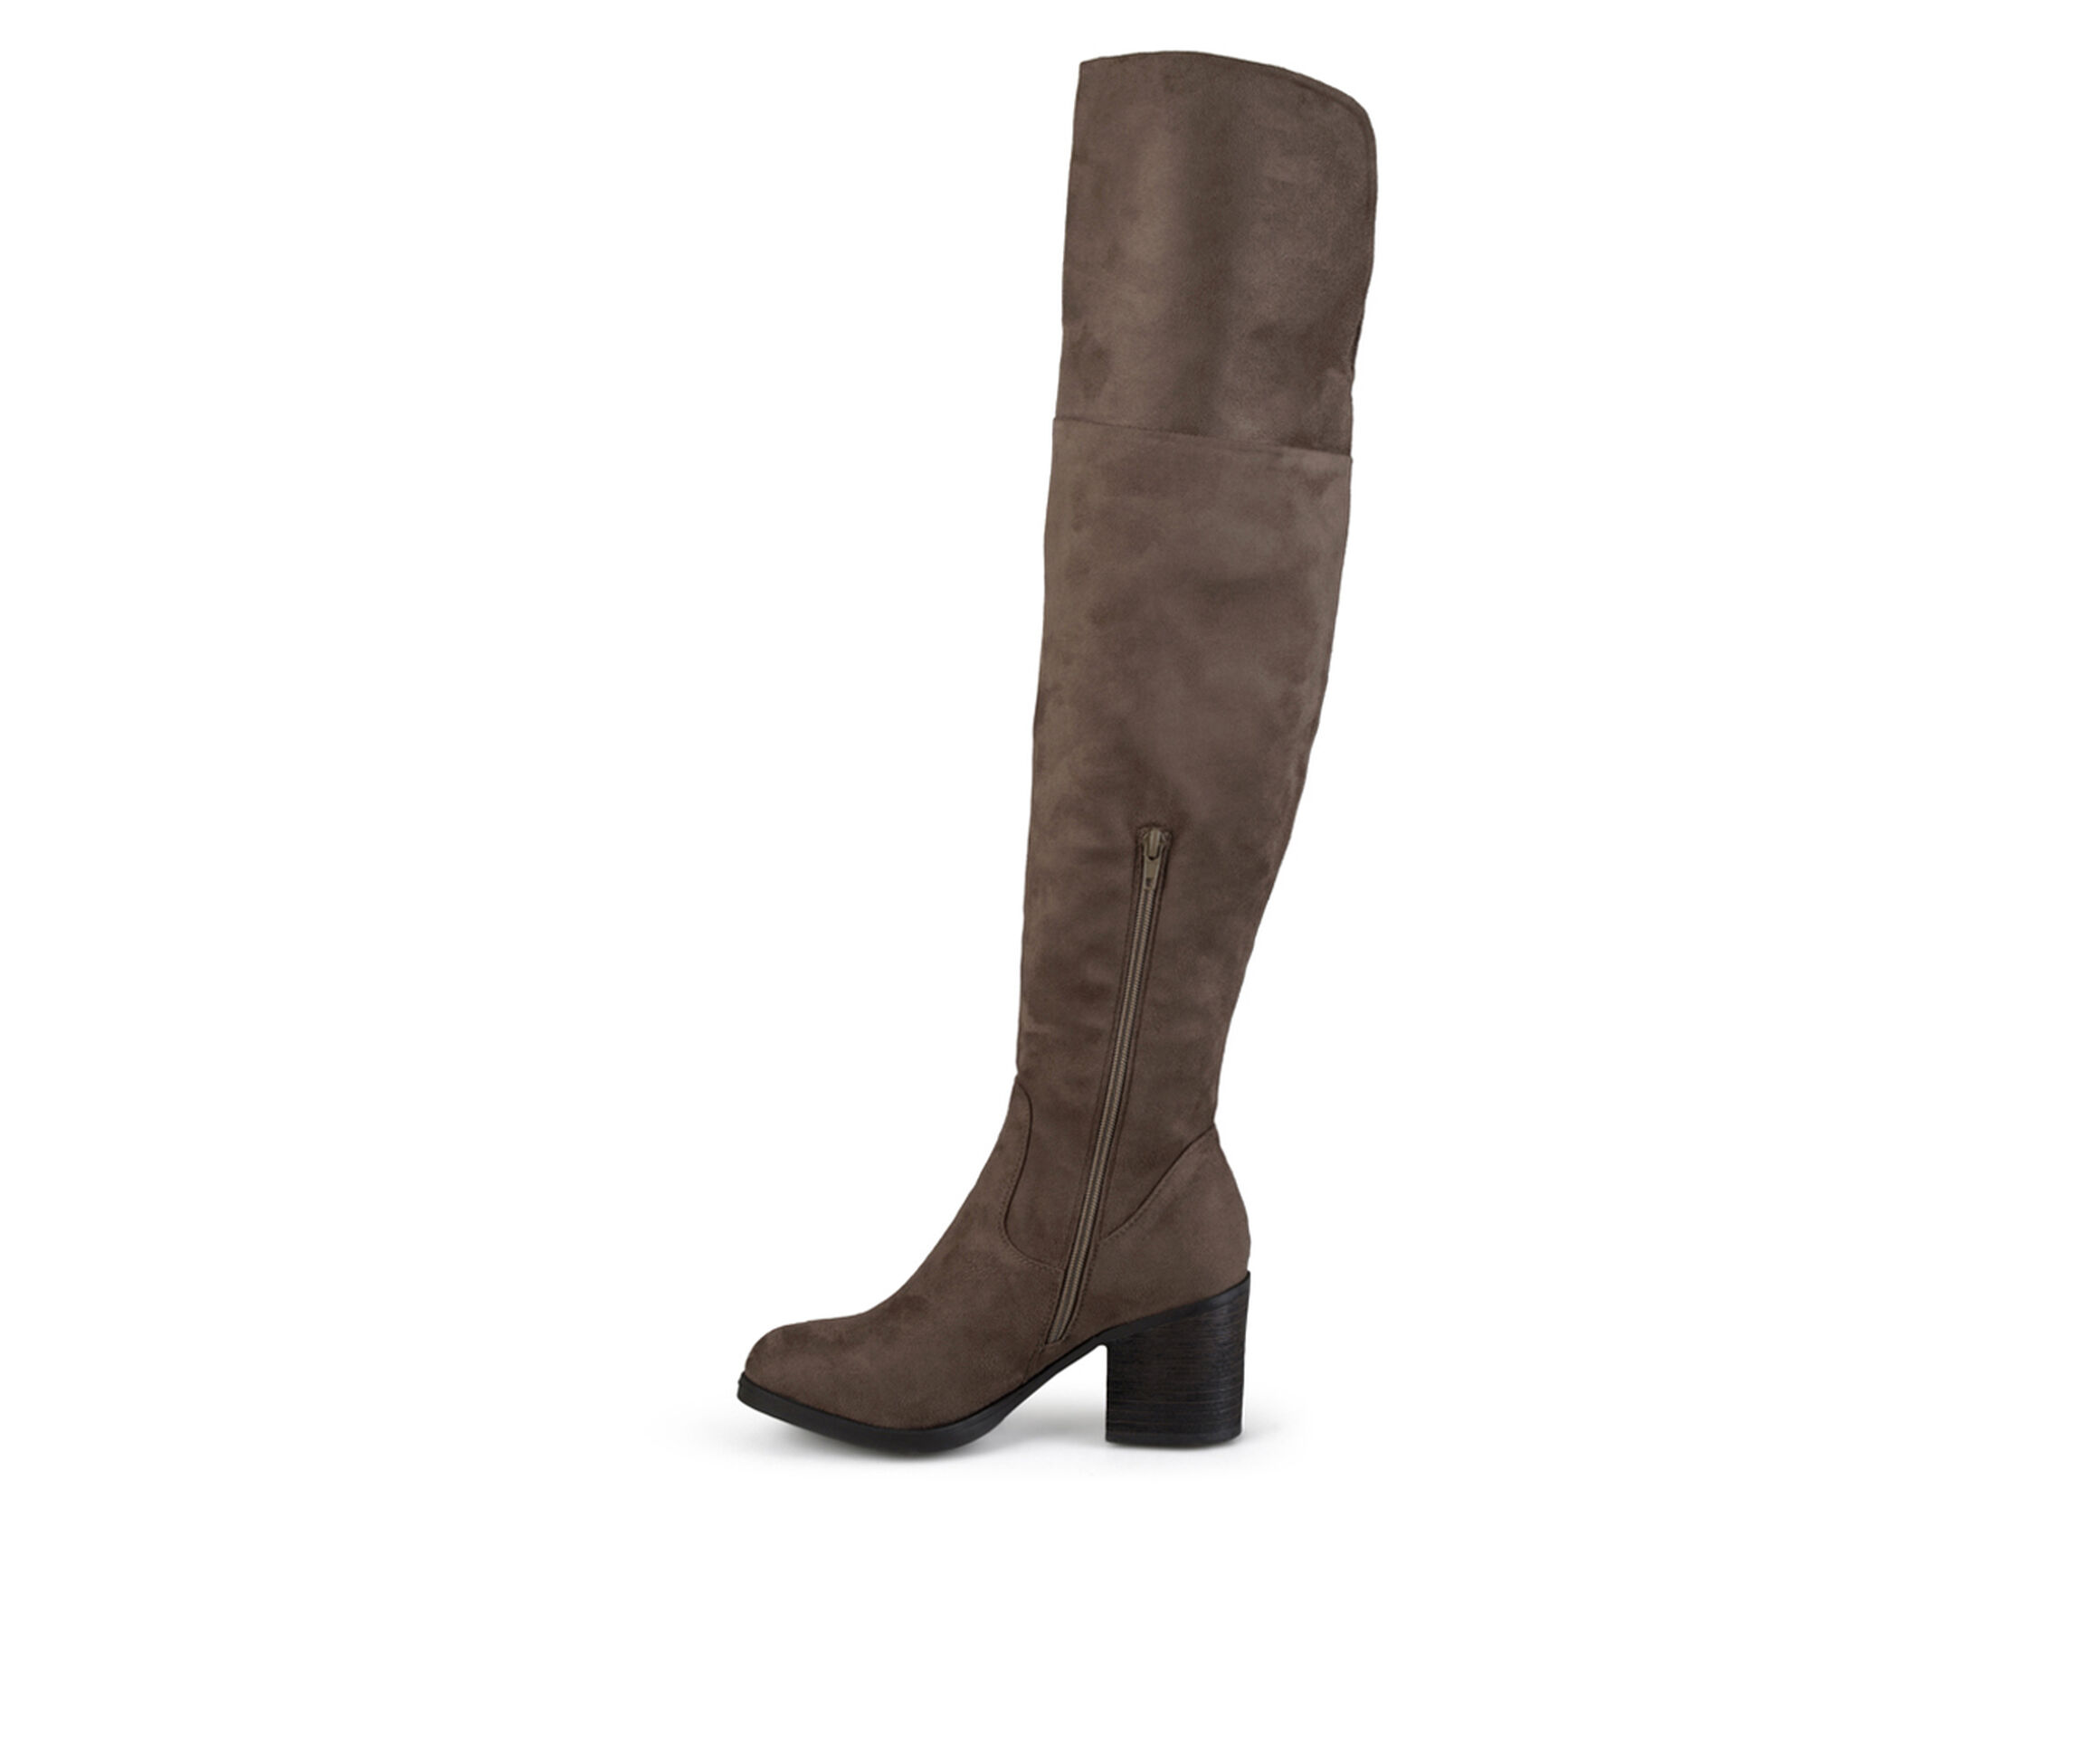 Journee Collection Sana Over-The-Knee Boots